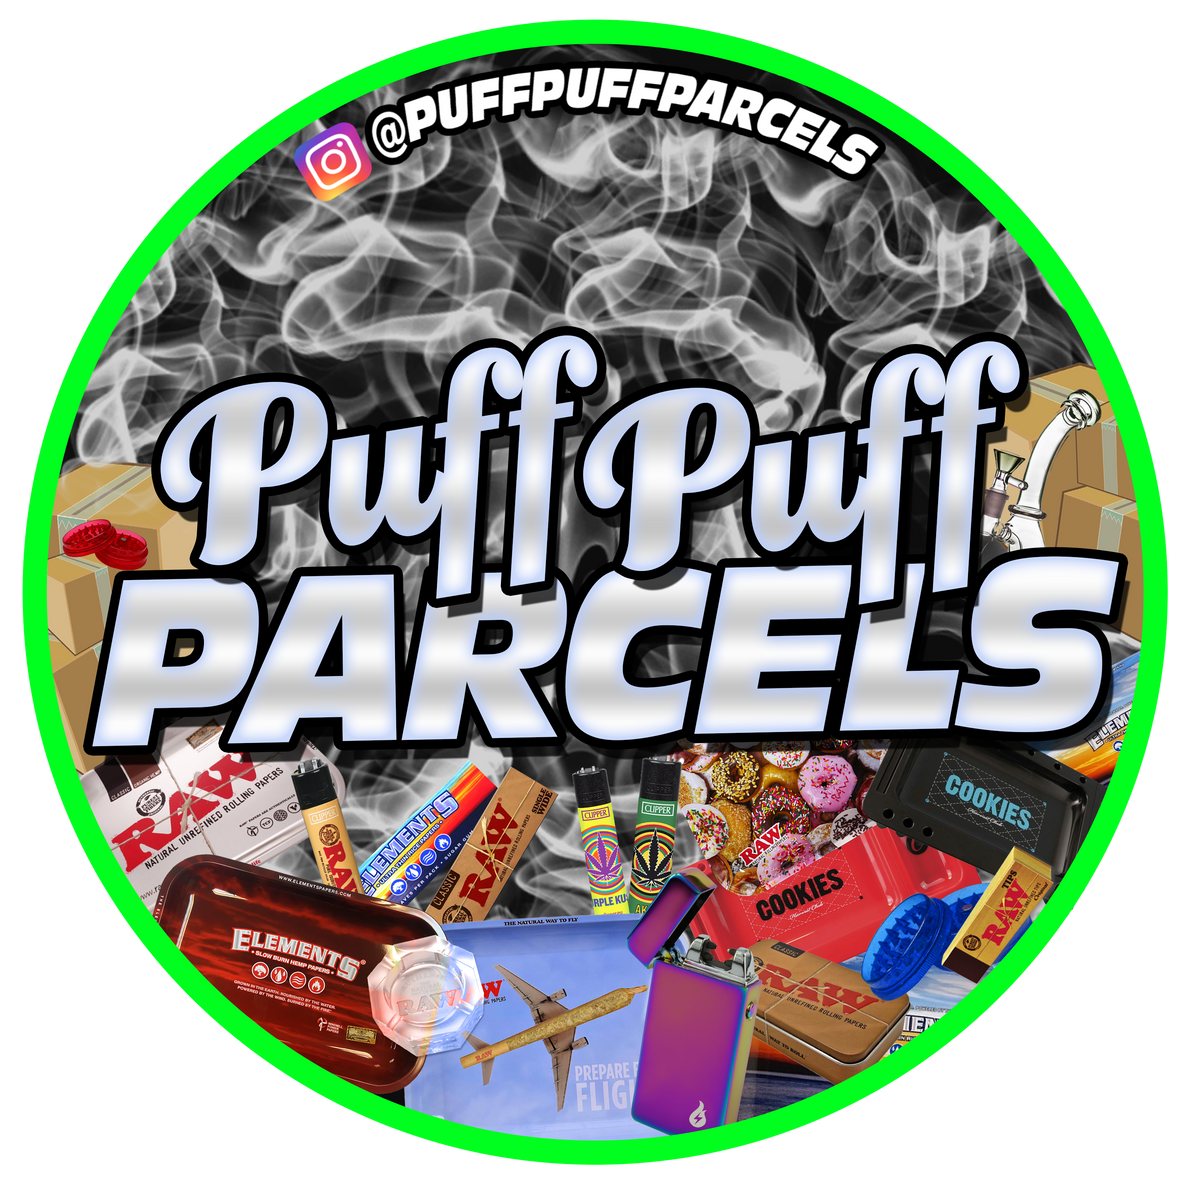 Puffpuffparcels– PuffPuffParcels